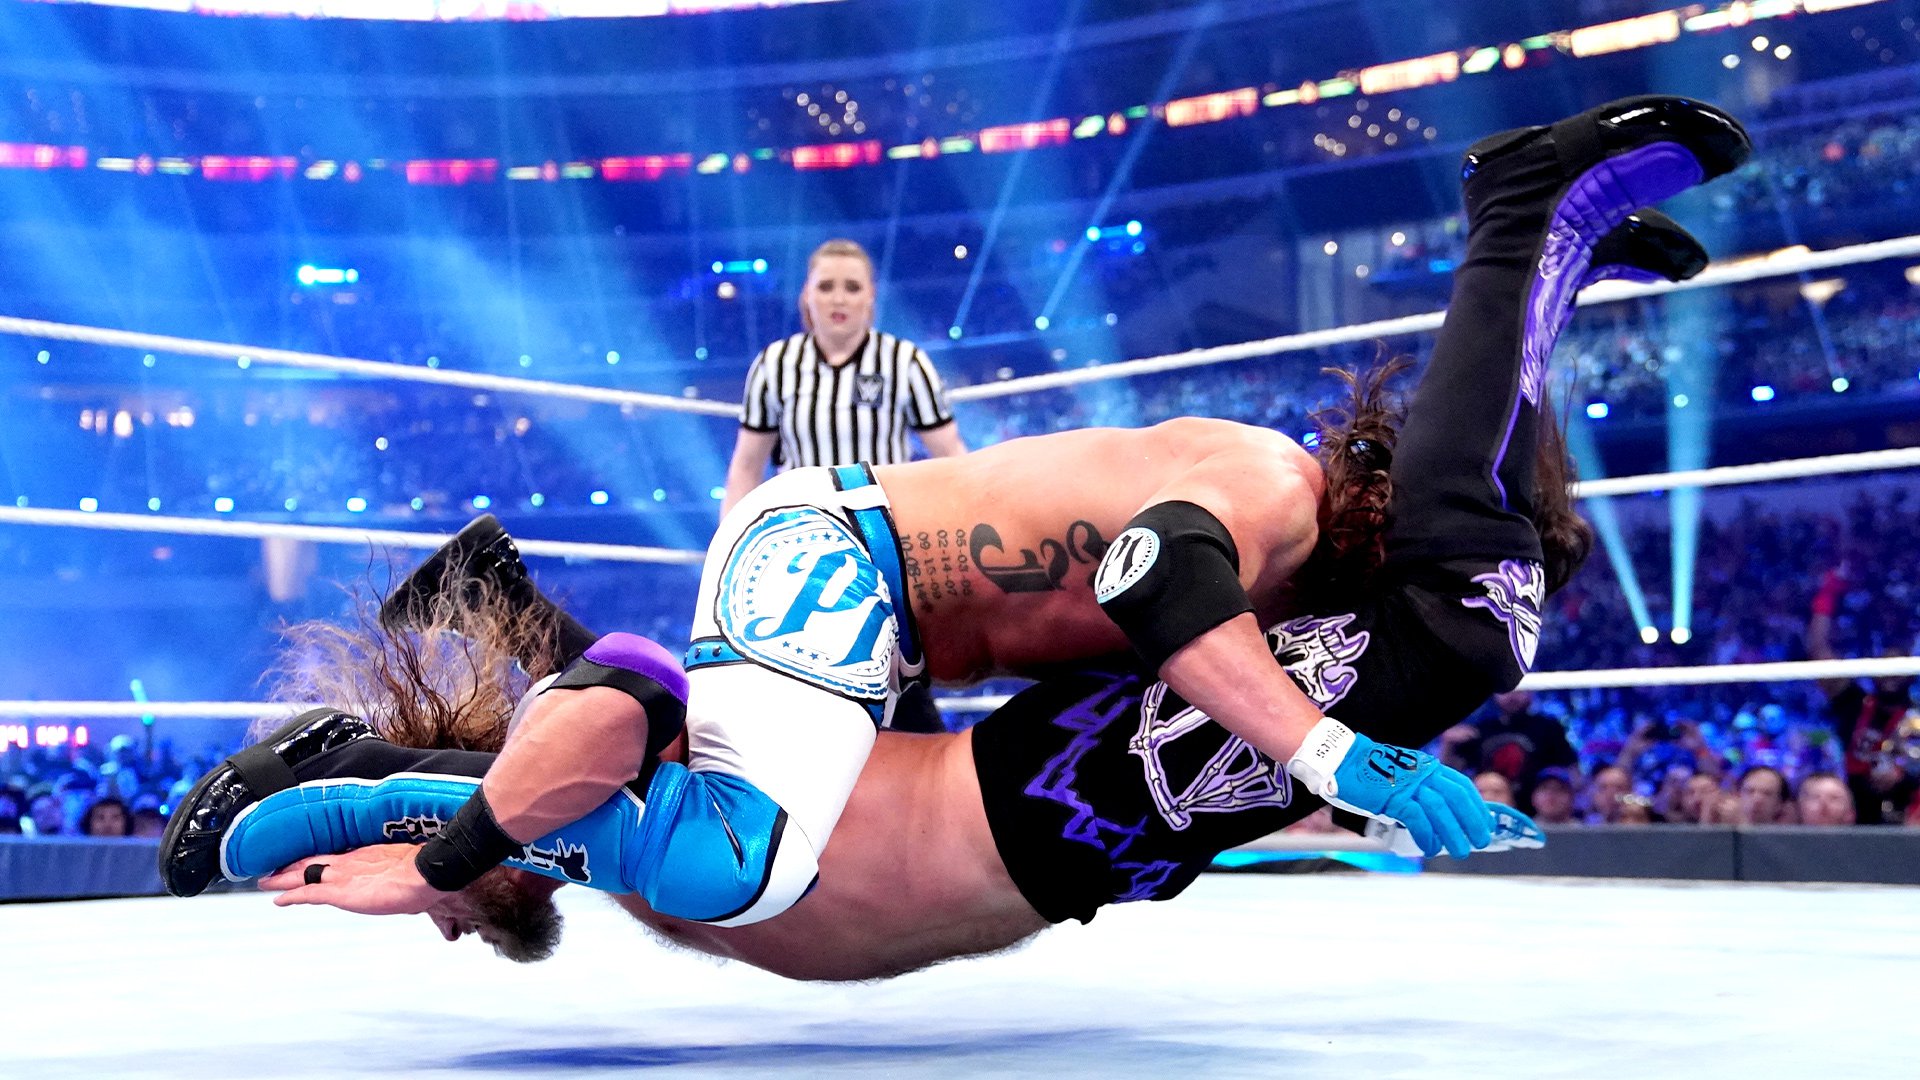 WWE WrestleMania Results and Video picture pic